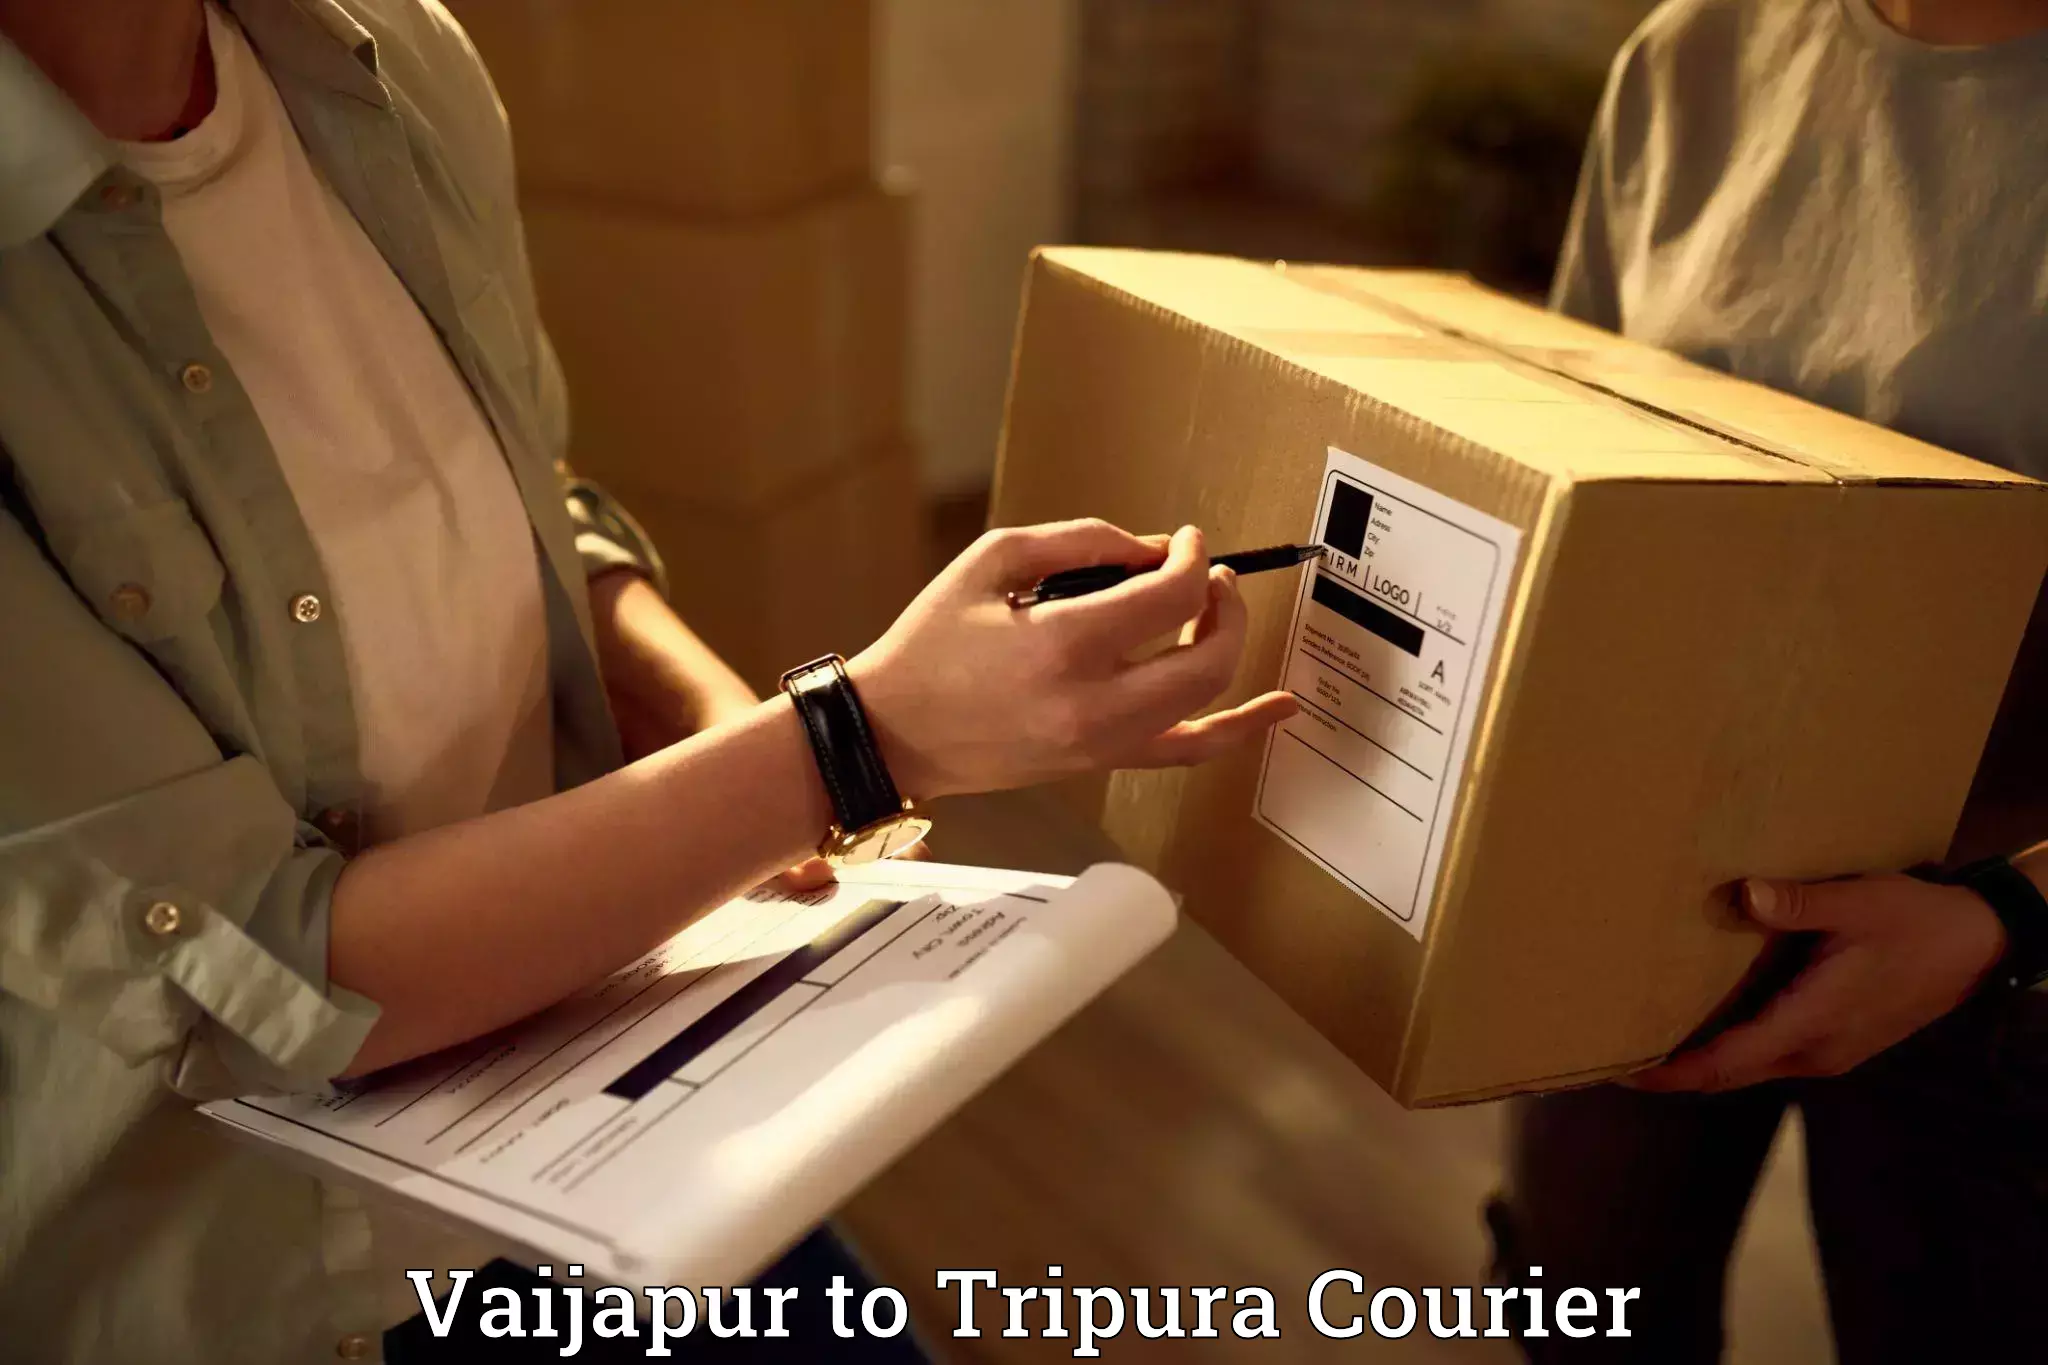 Professional movers and packers Vaijapur to Udaipur Tripura